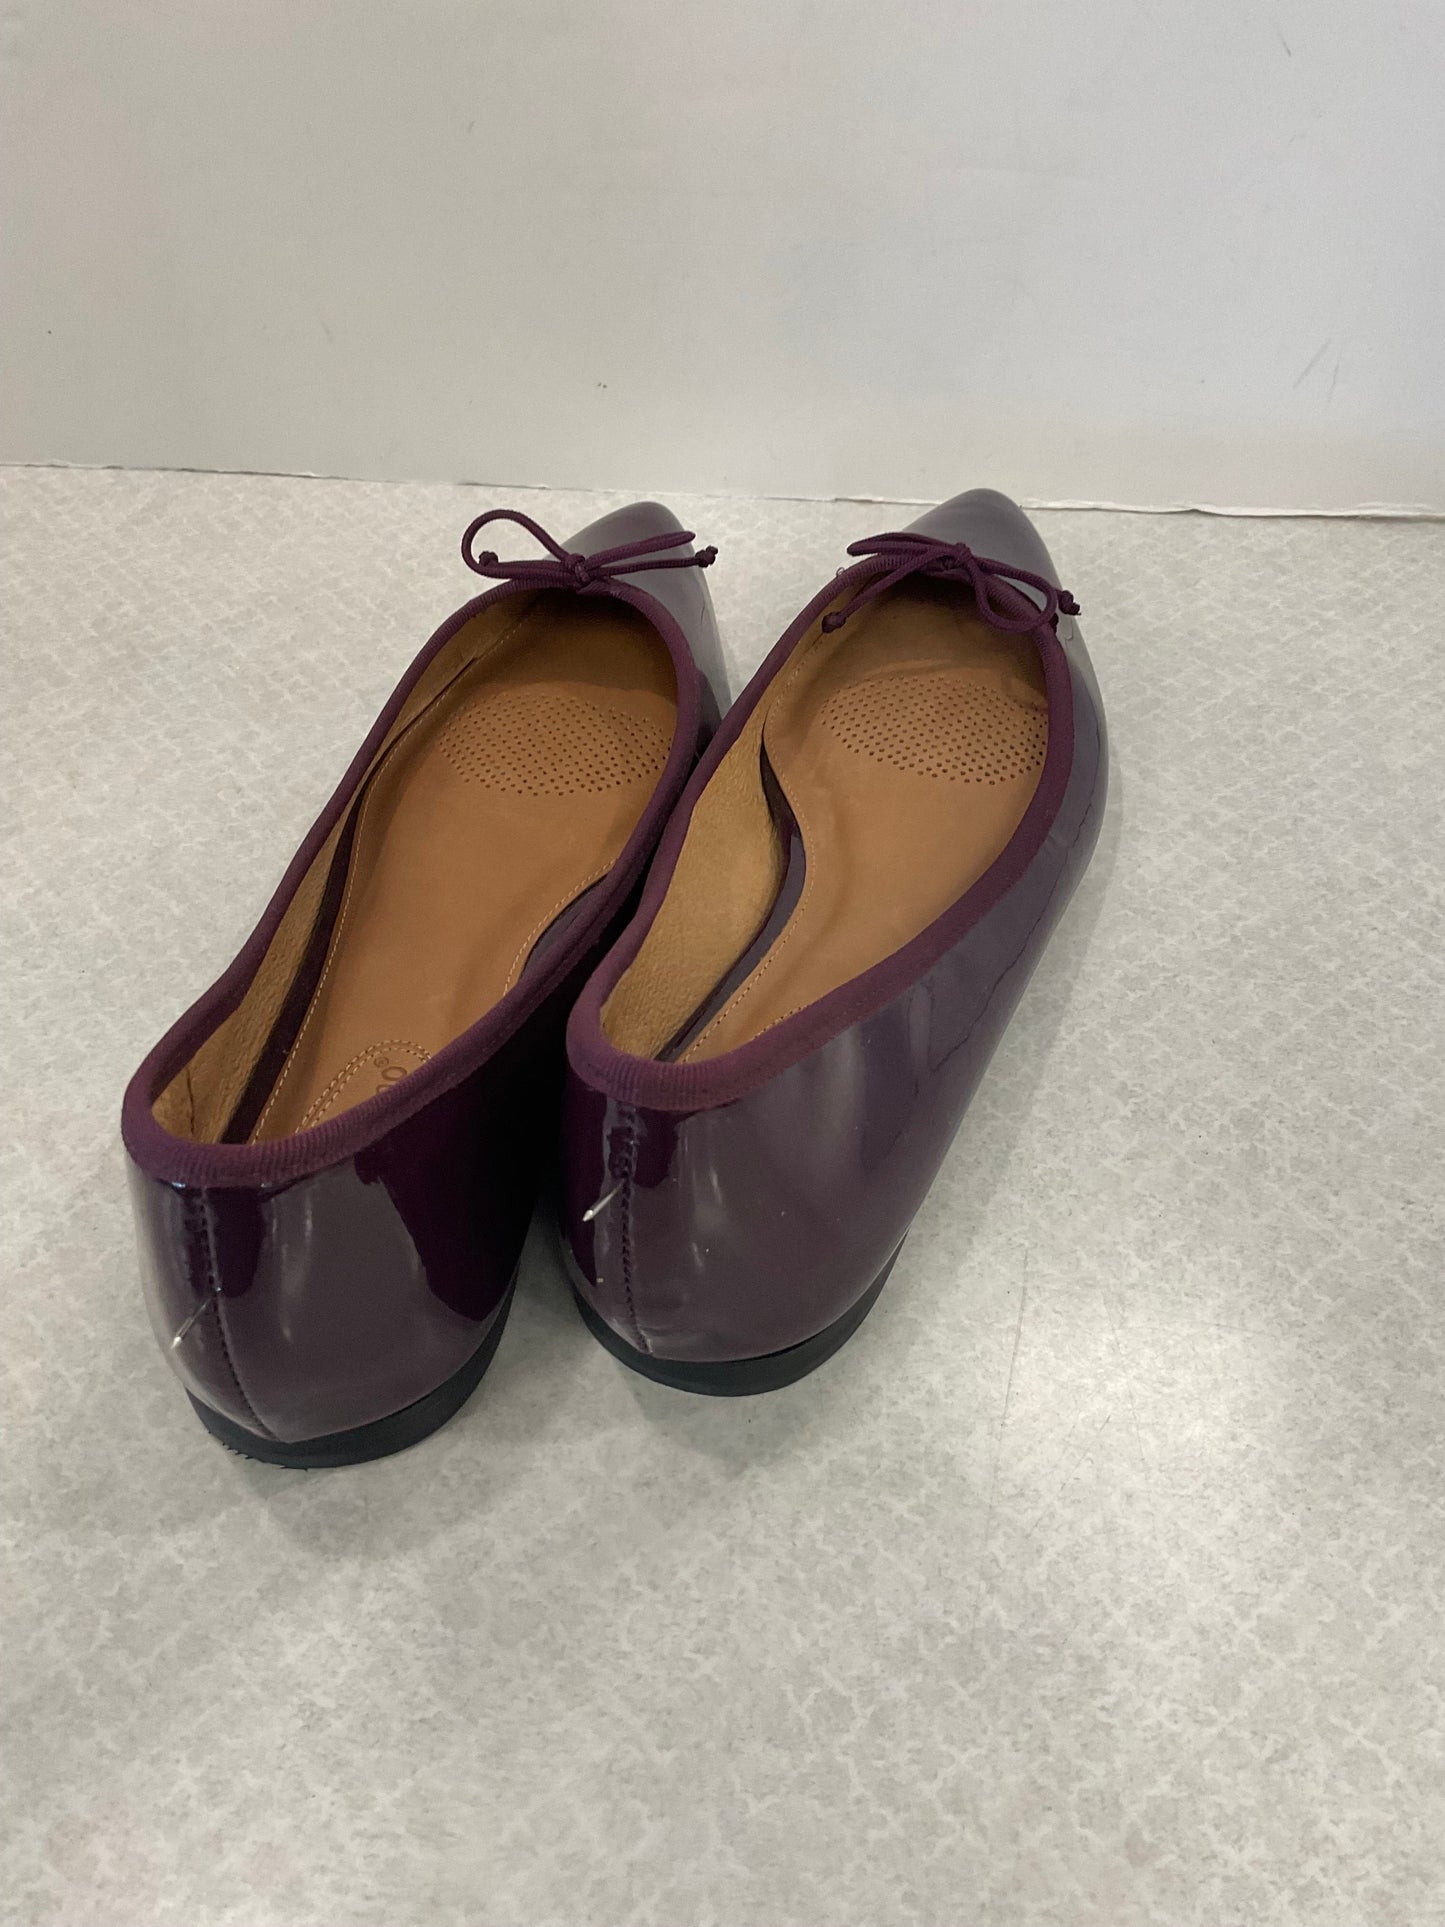 Shoes Flats Ballet By Corso Cosmo  Size: 10